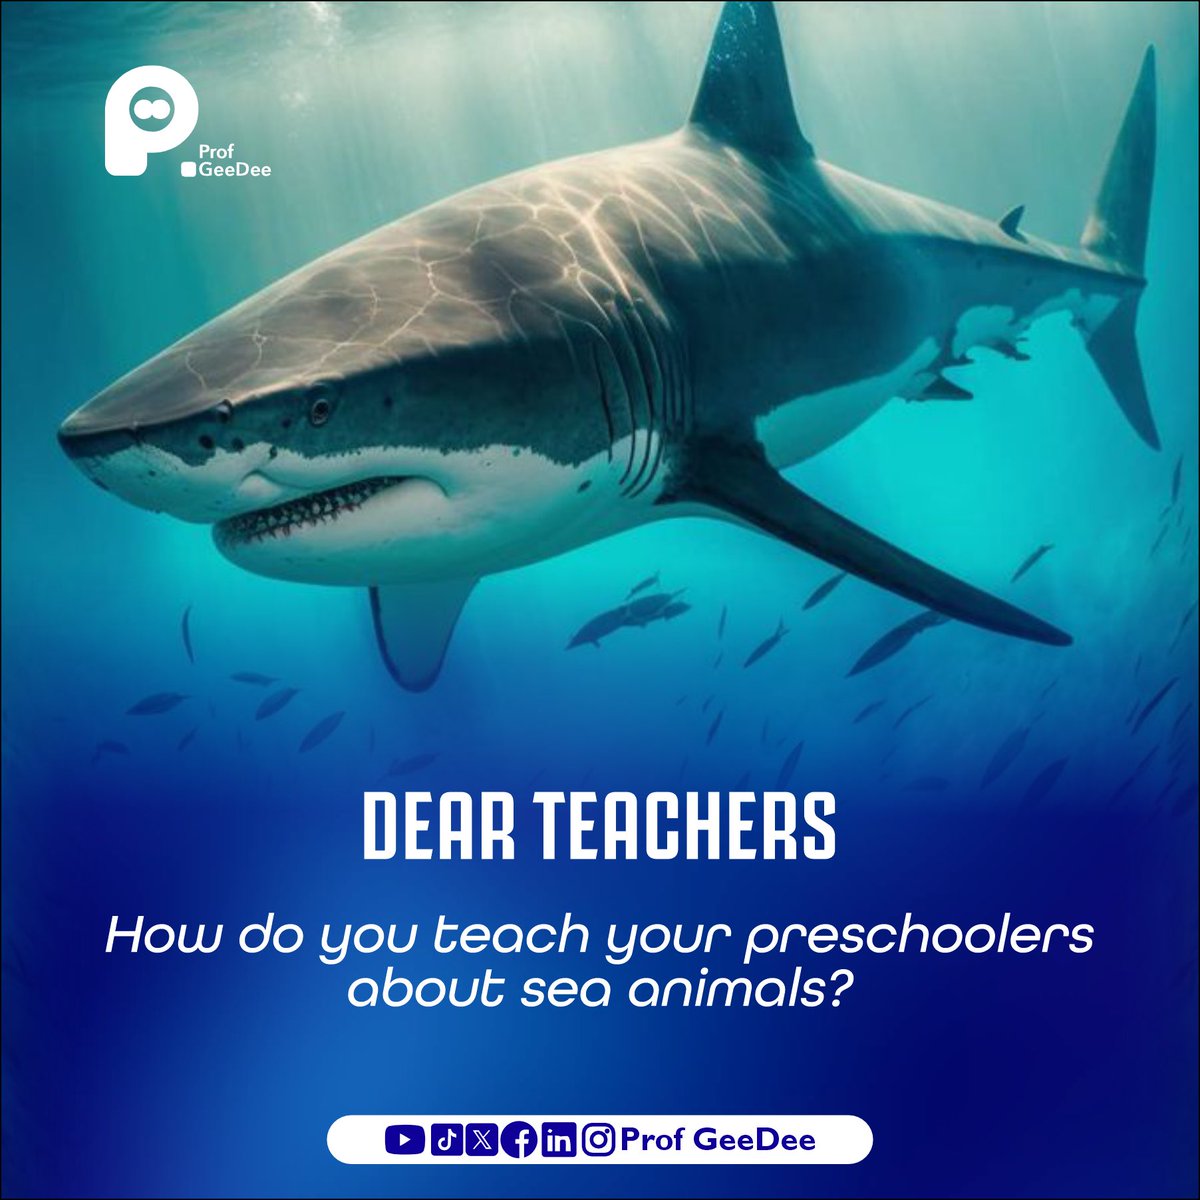 Teaching preschoolers about sea animals  helps them develop an understanding and appreciation for the natural world around them. 

 You can start by showing them pictures of sea animals.

#earlyyears
#earlylearning
#earlychildhooddevelopment
#dearteacherseries
#profgeedee